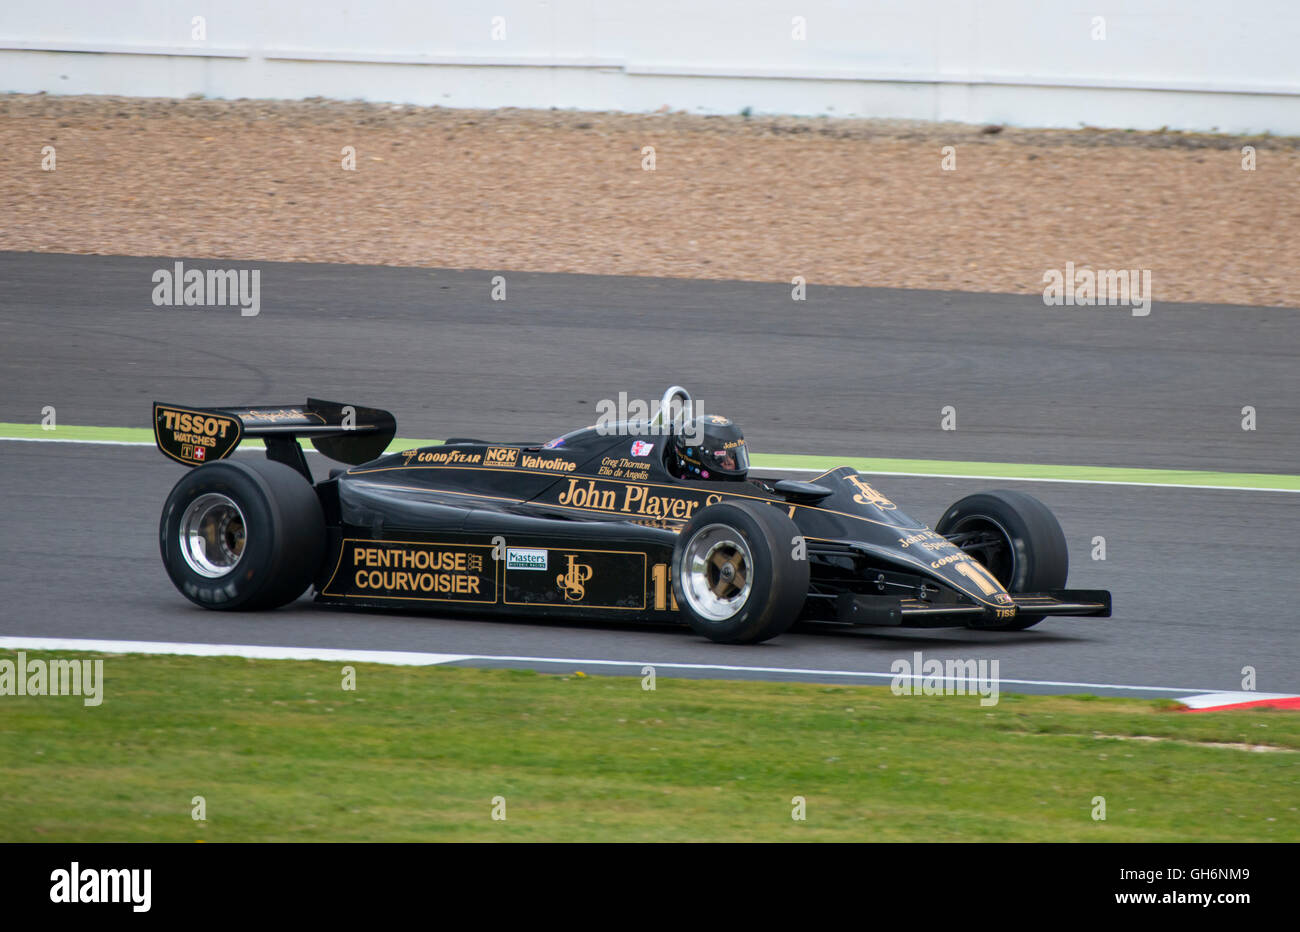 Gregory Thornton driving a Lotus 91/5 in the FIA Masters Historic Formula 1 race at the 2016 Silverstone Classic event, England Stock Photo